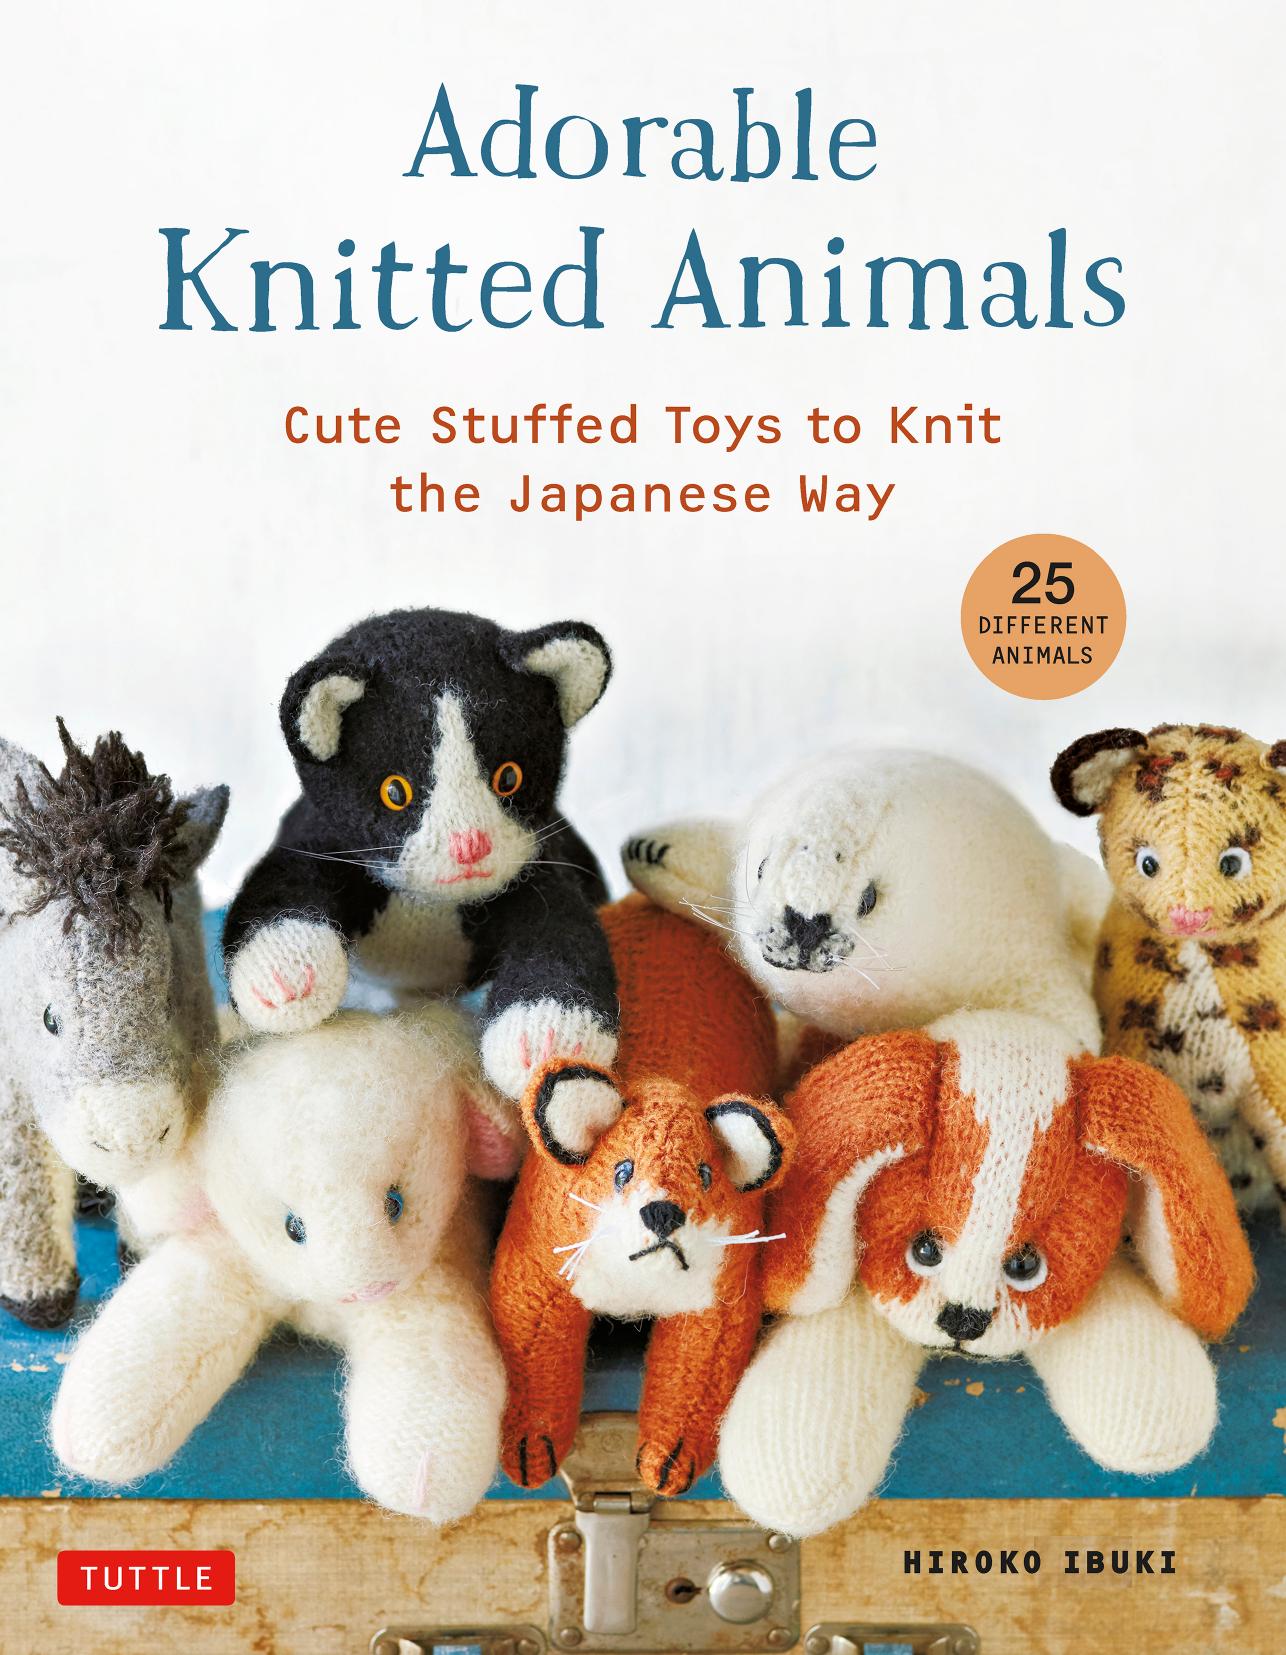 Adorable Knitted Animals 01-112.indd by Felicia